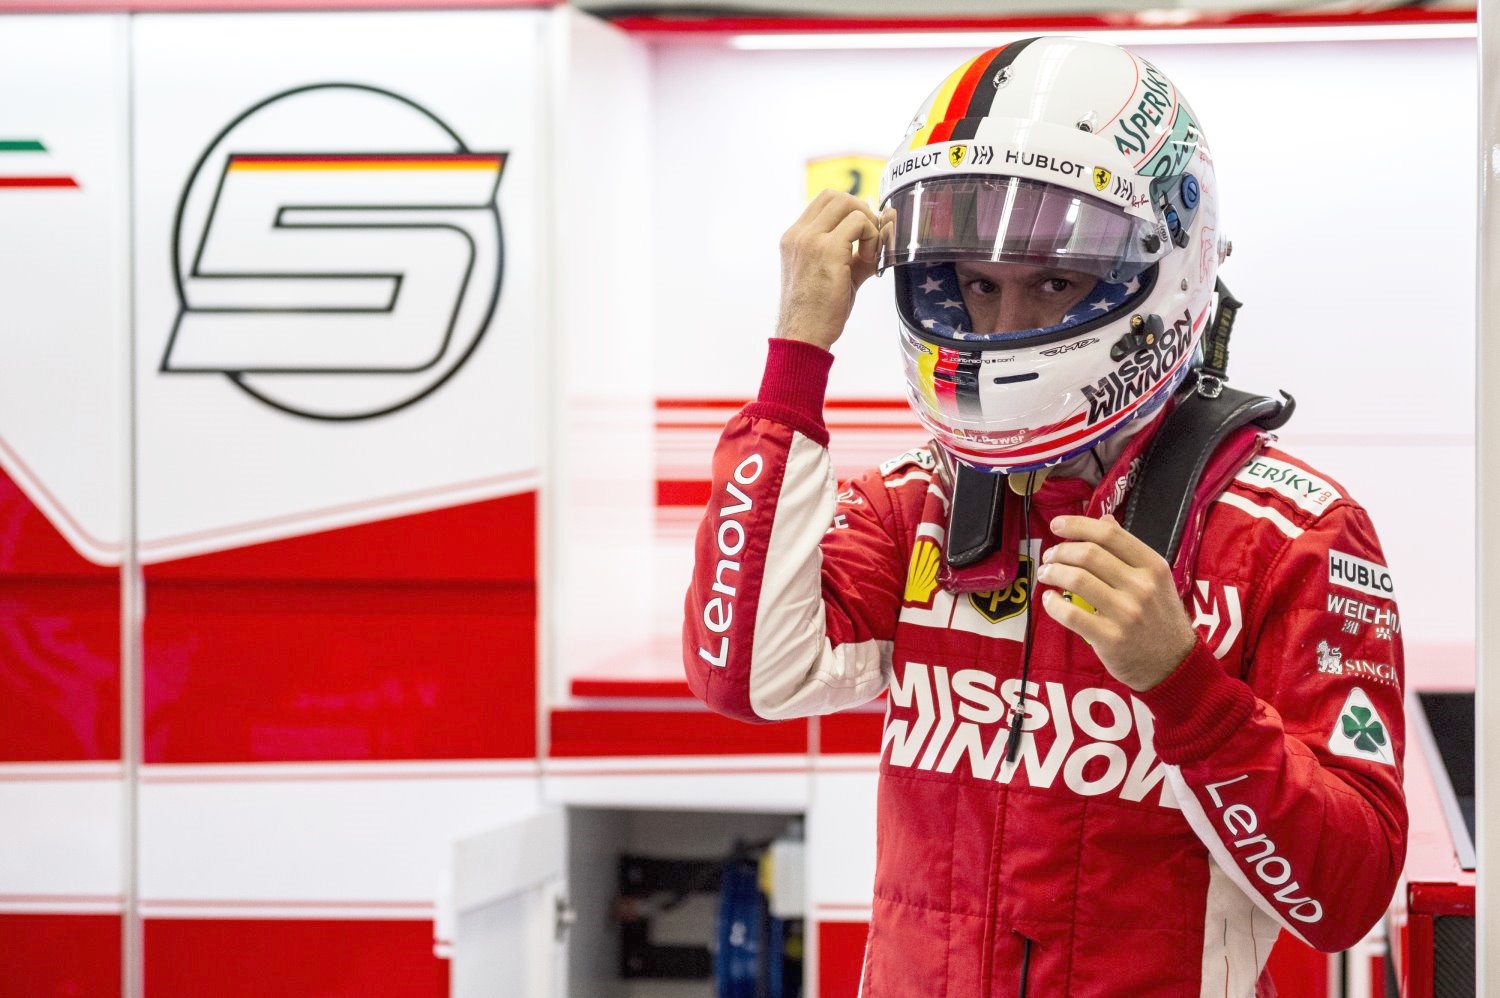 Vettel and Ferrari failed, and must now look ahead to 2019